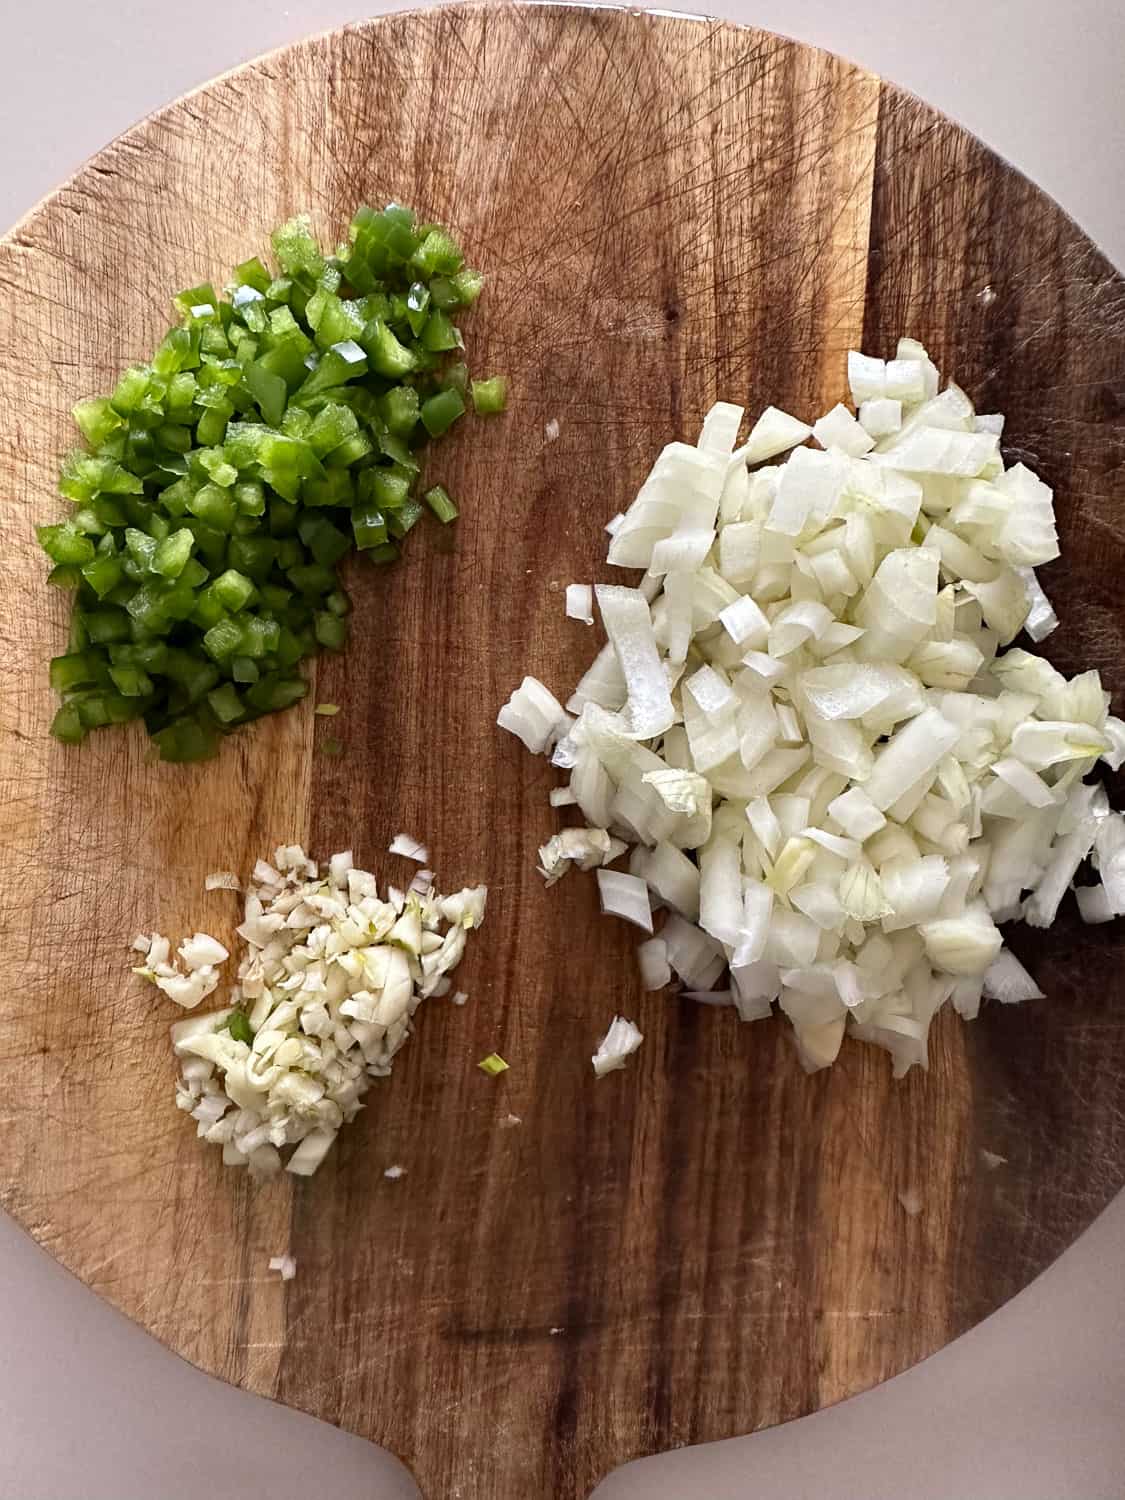 chopped onion, garlic, and jalapeno on wooden board